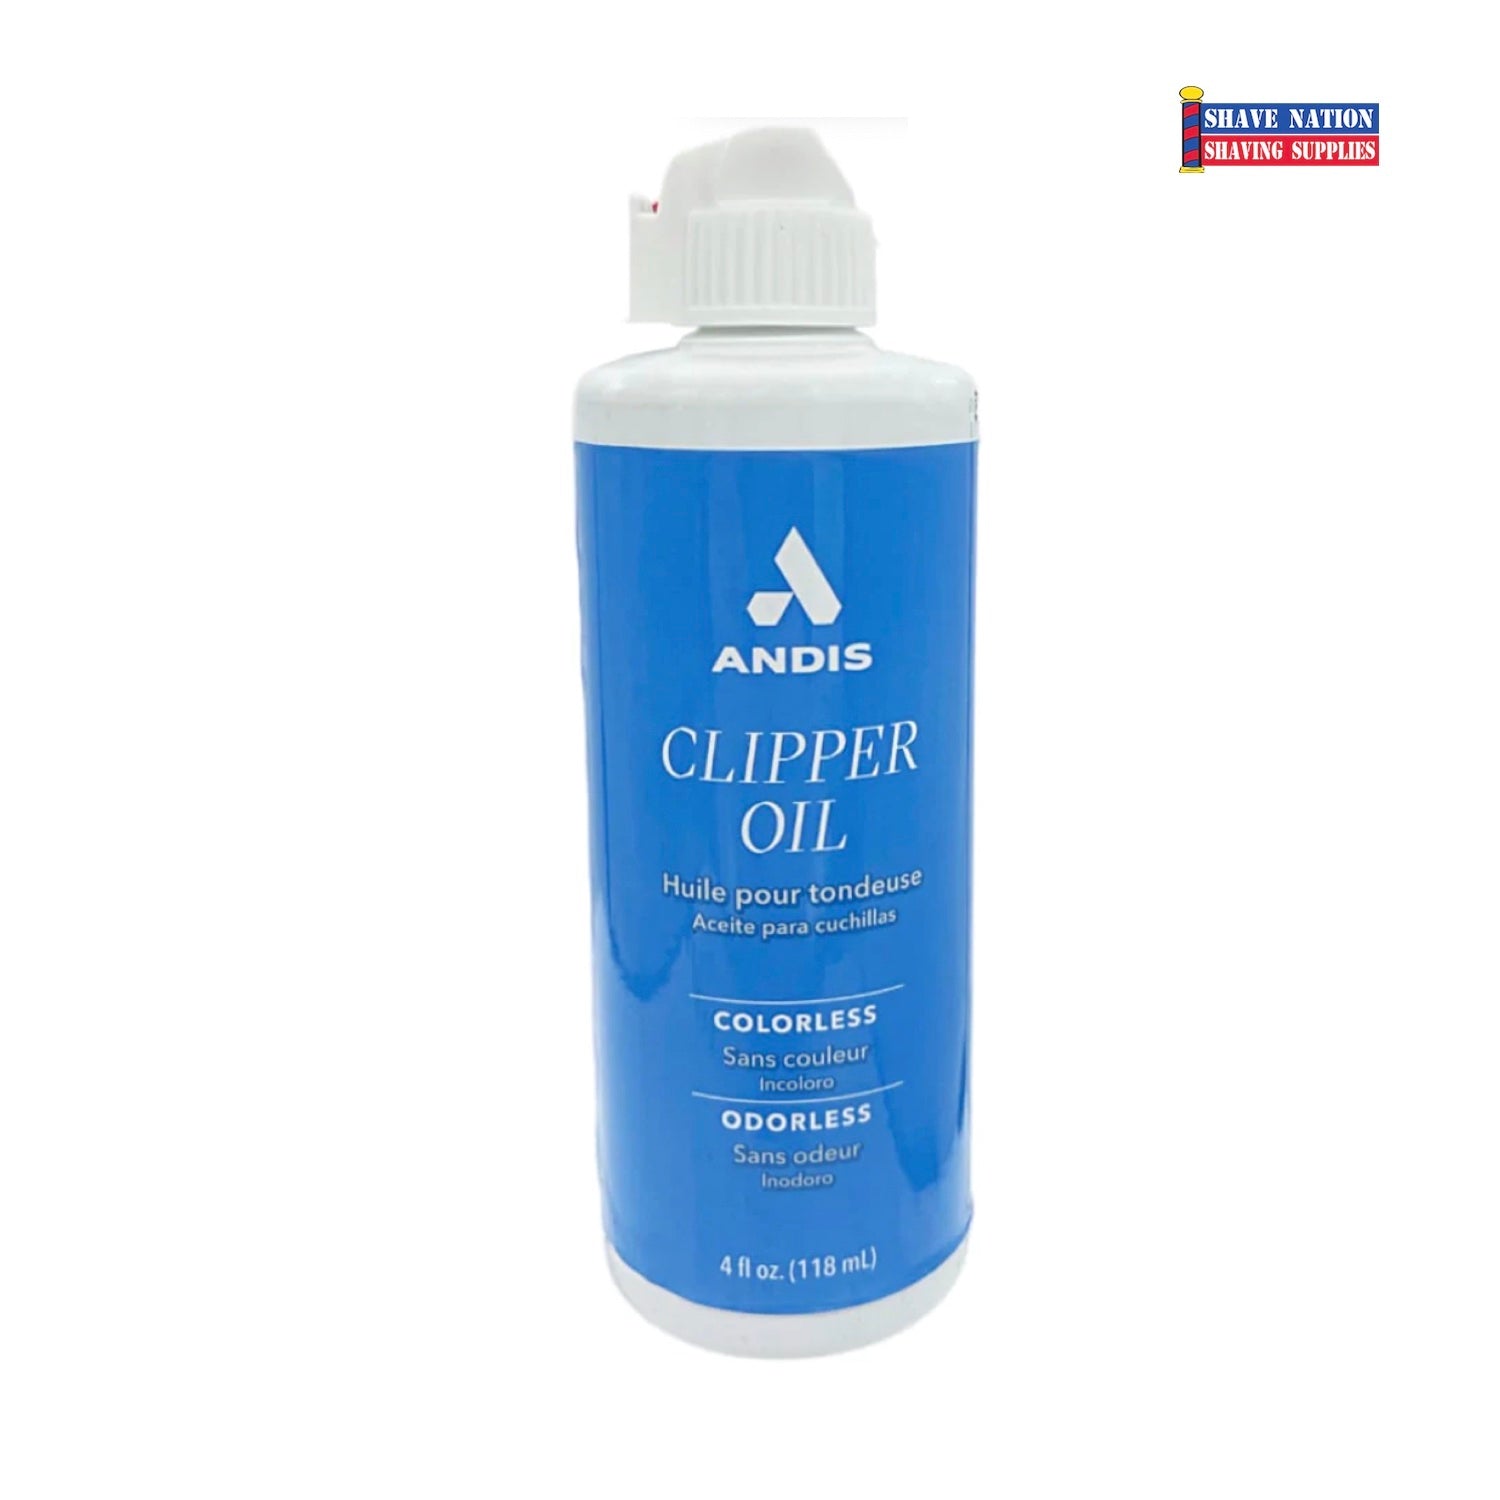 Andis Clipper Trimmer Oil lubricant